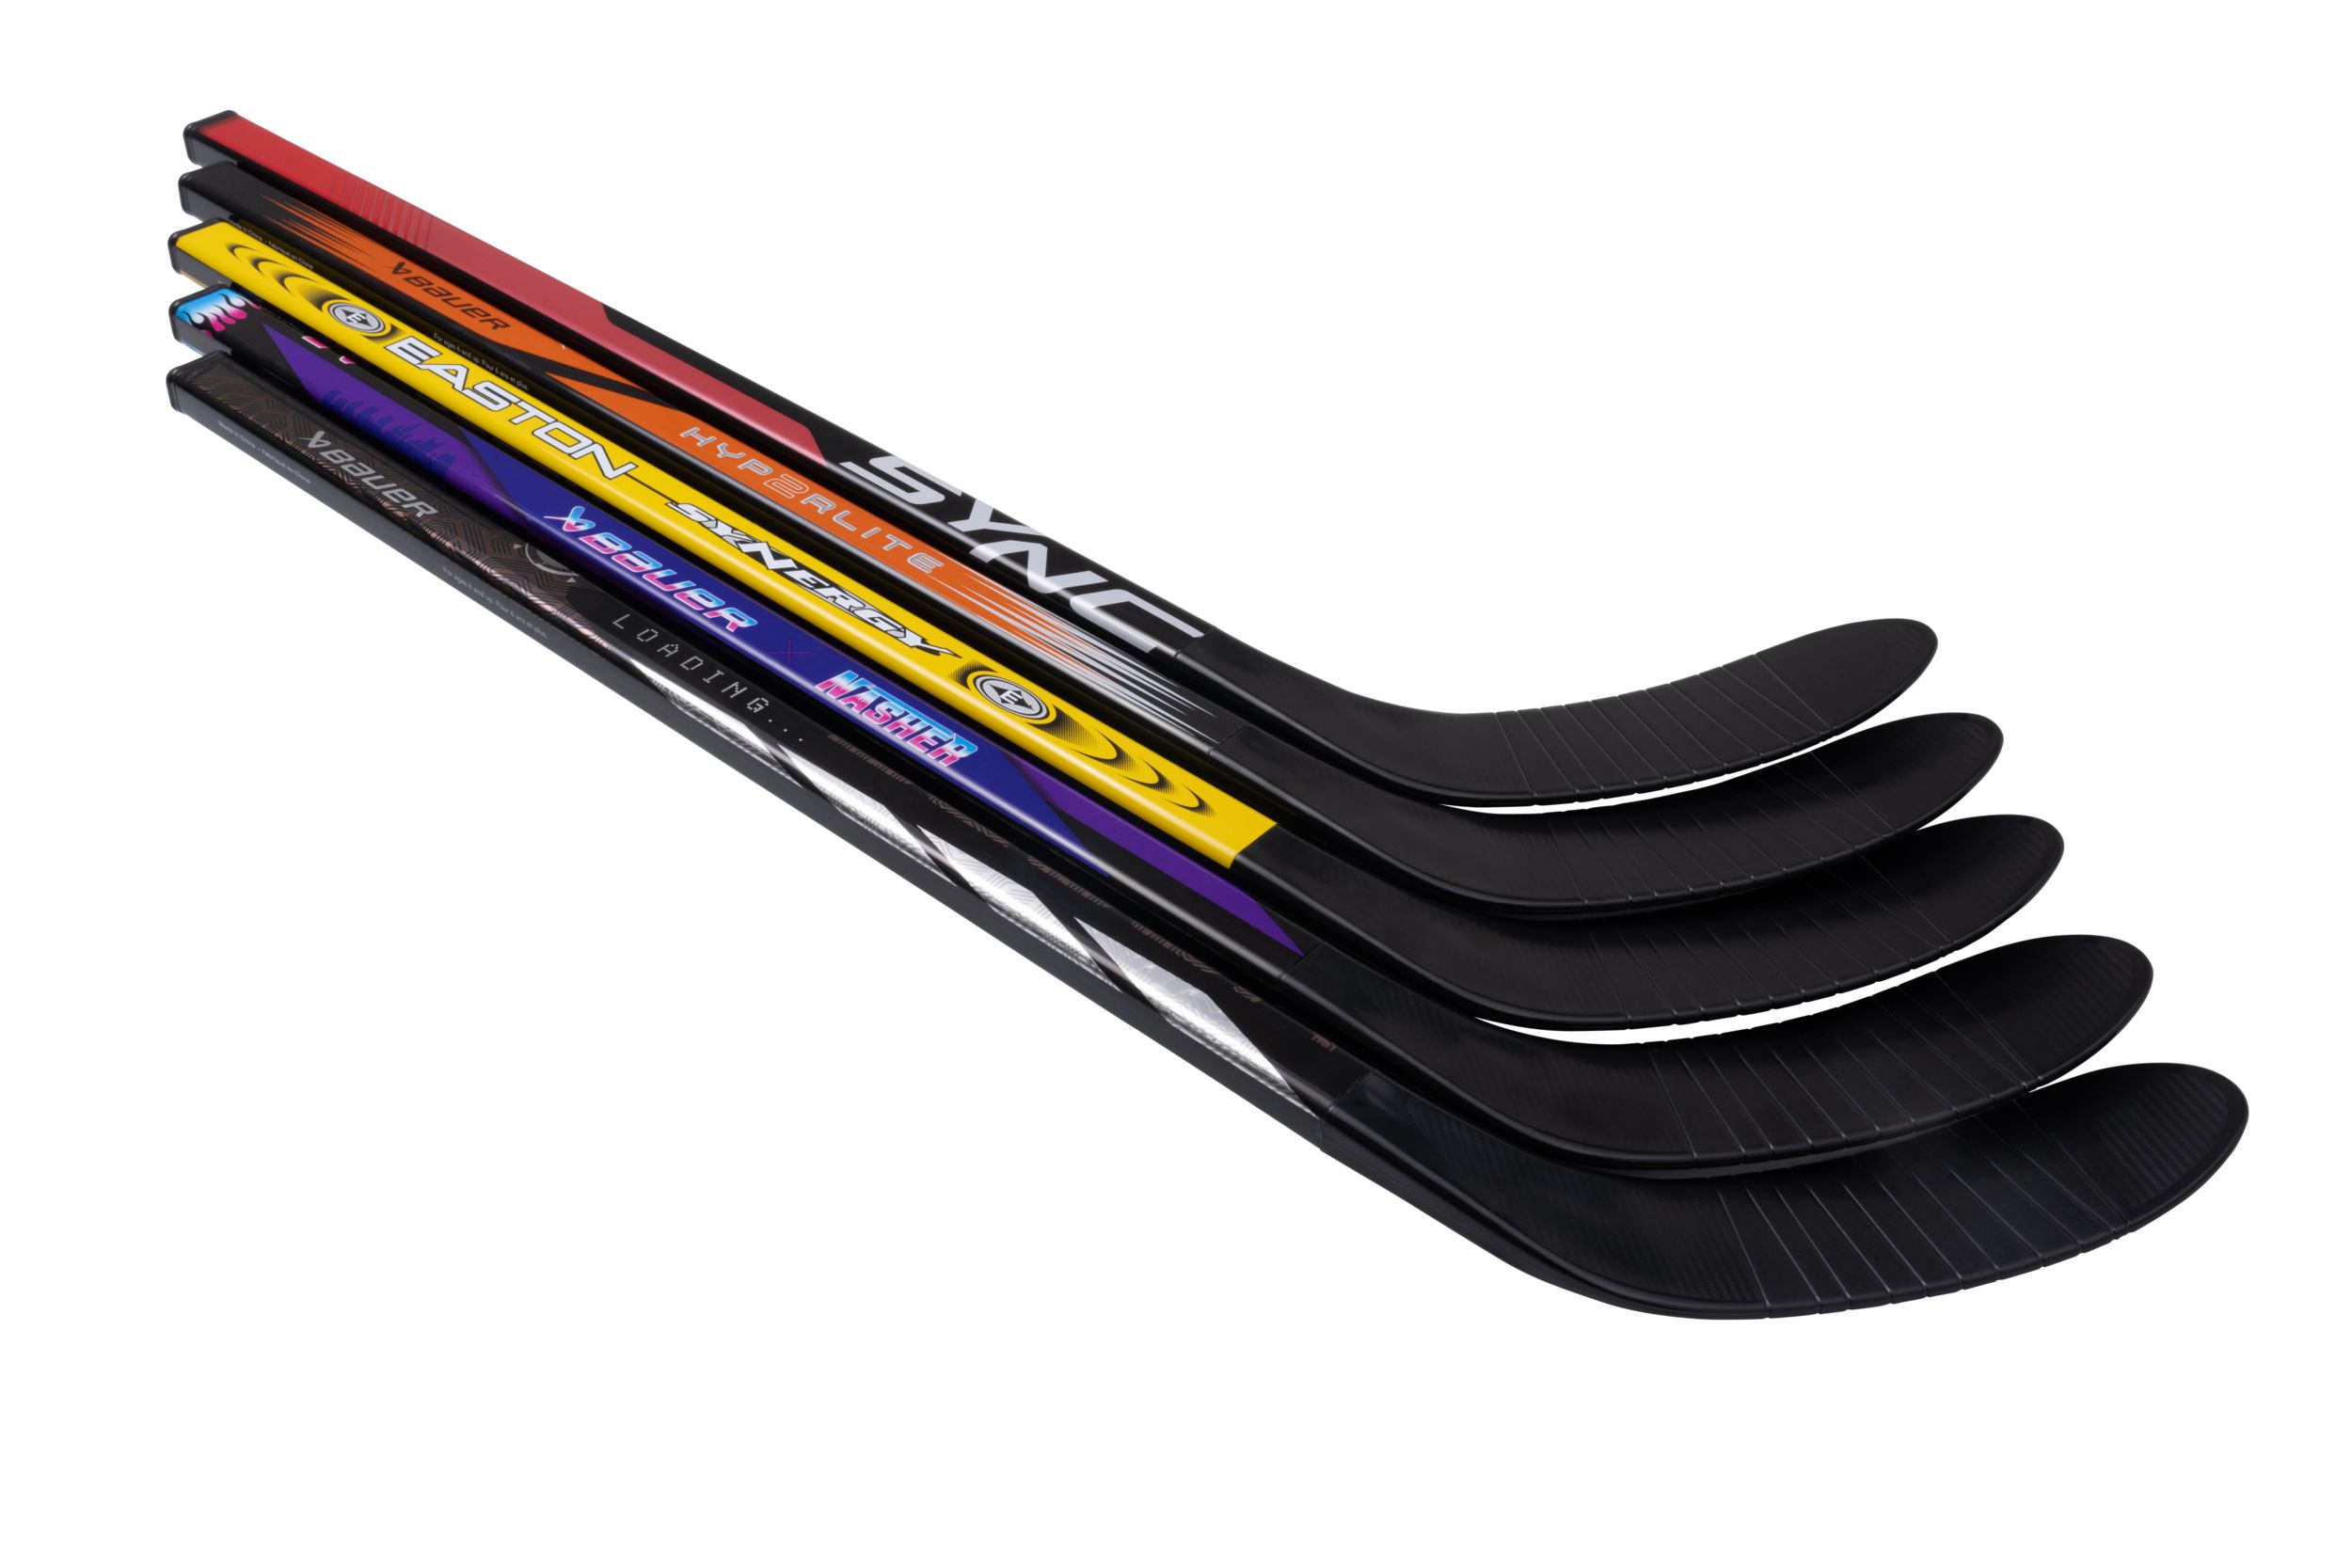 Bauer Hockey - Mystery Mini Sticks are BACK! Unwrap to reveal one of five  surprise designs. Available now